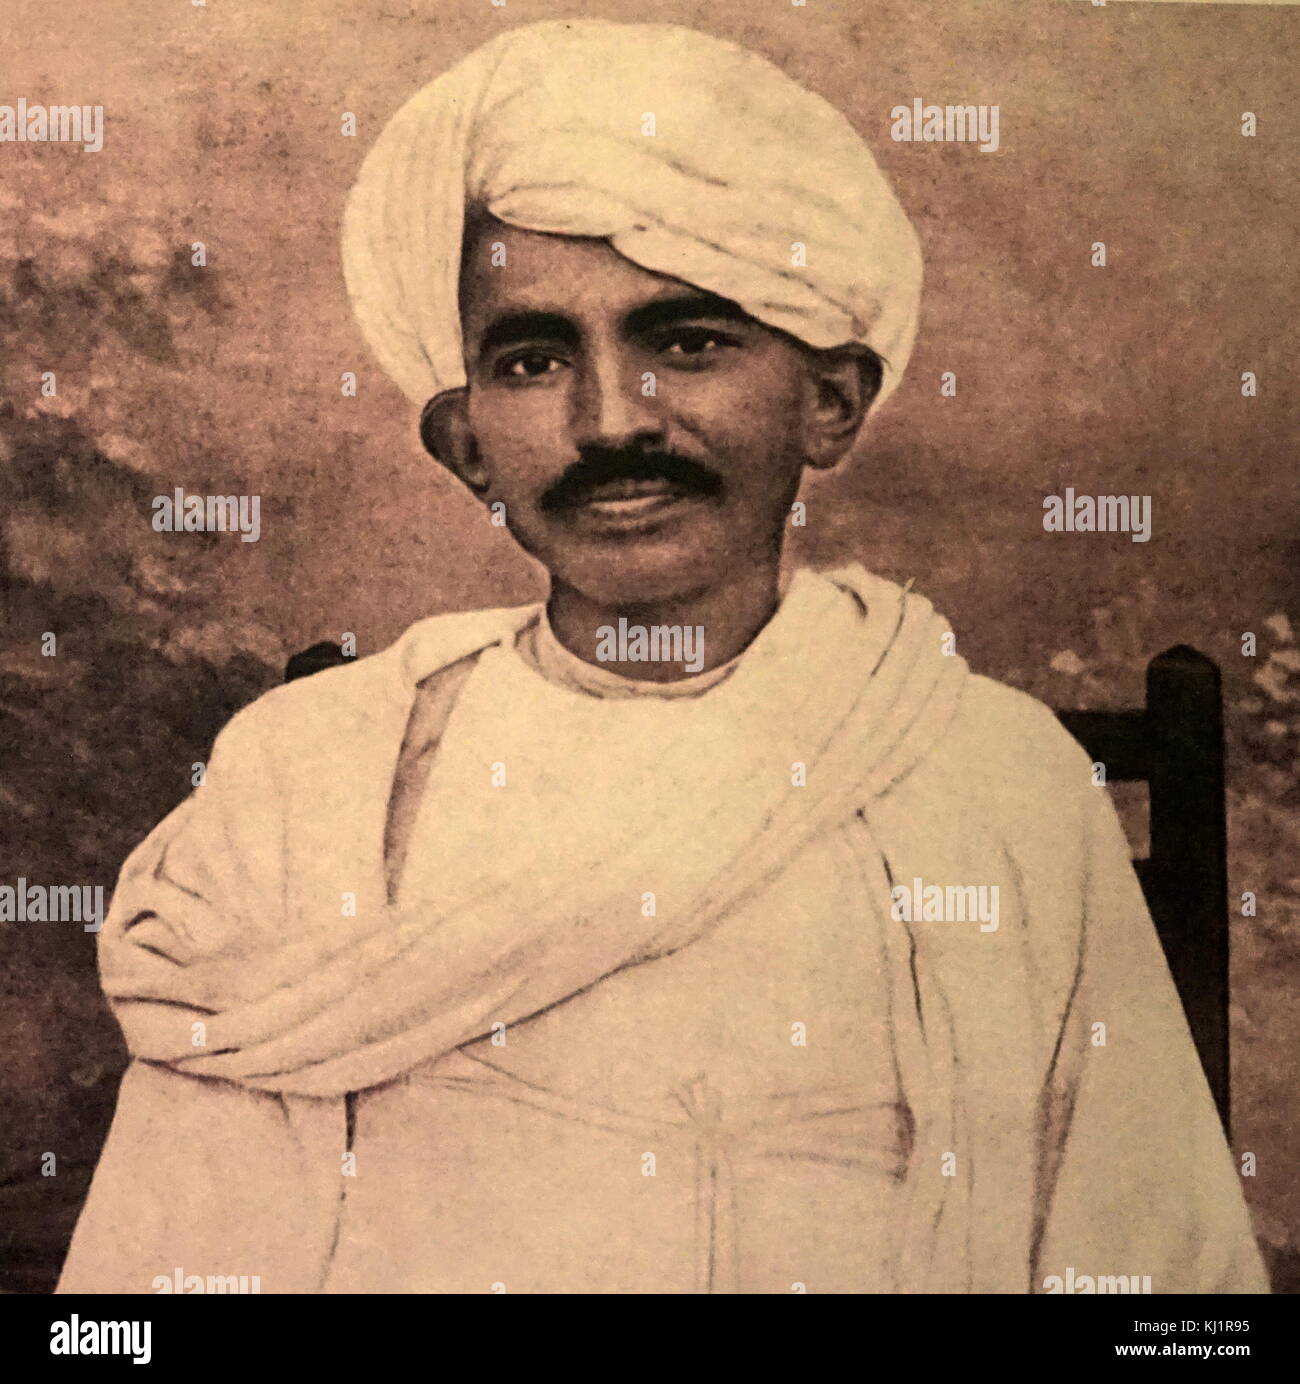 Young Satyagraha and future Mahatma Gandhi in South Africa, Mohandas Karamchand Gandhi 1869 – 1948), preeminent leader of the Indian independence movement in British-ruled India. Stock Photo